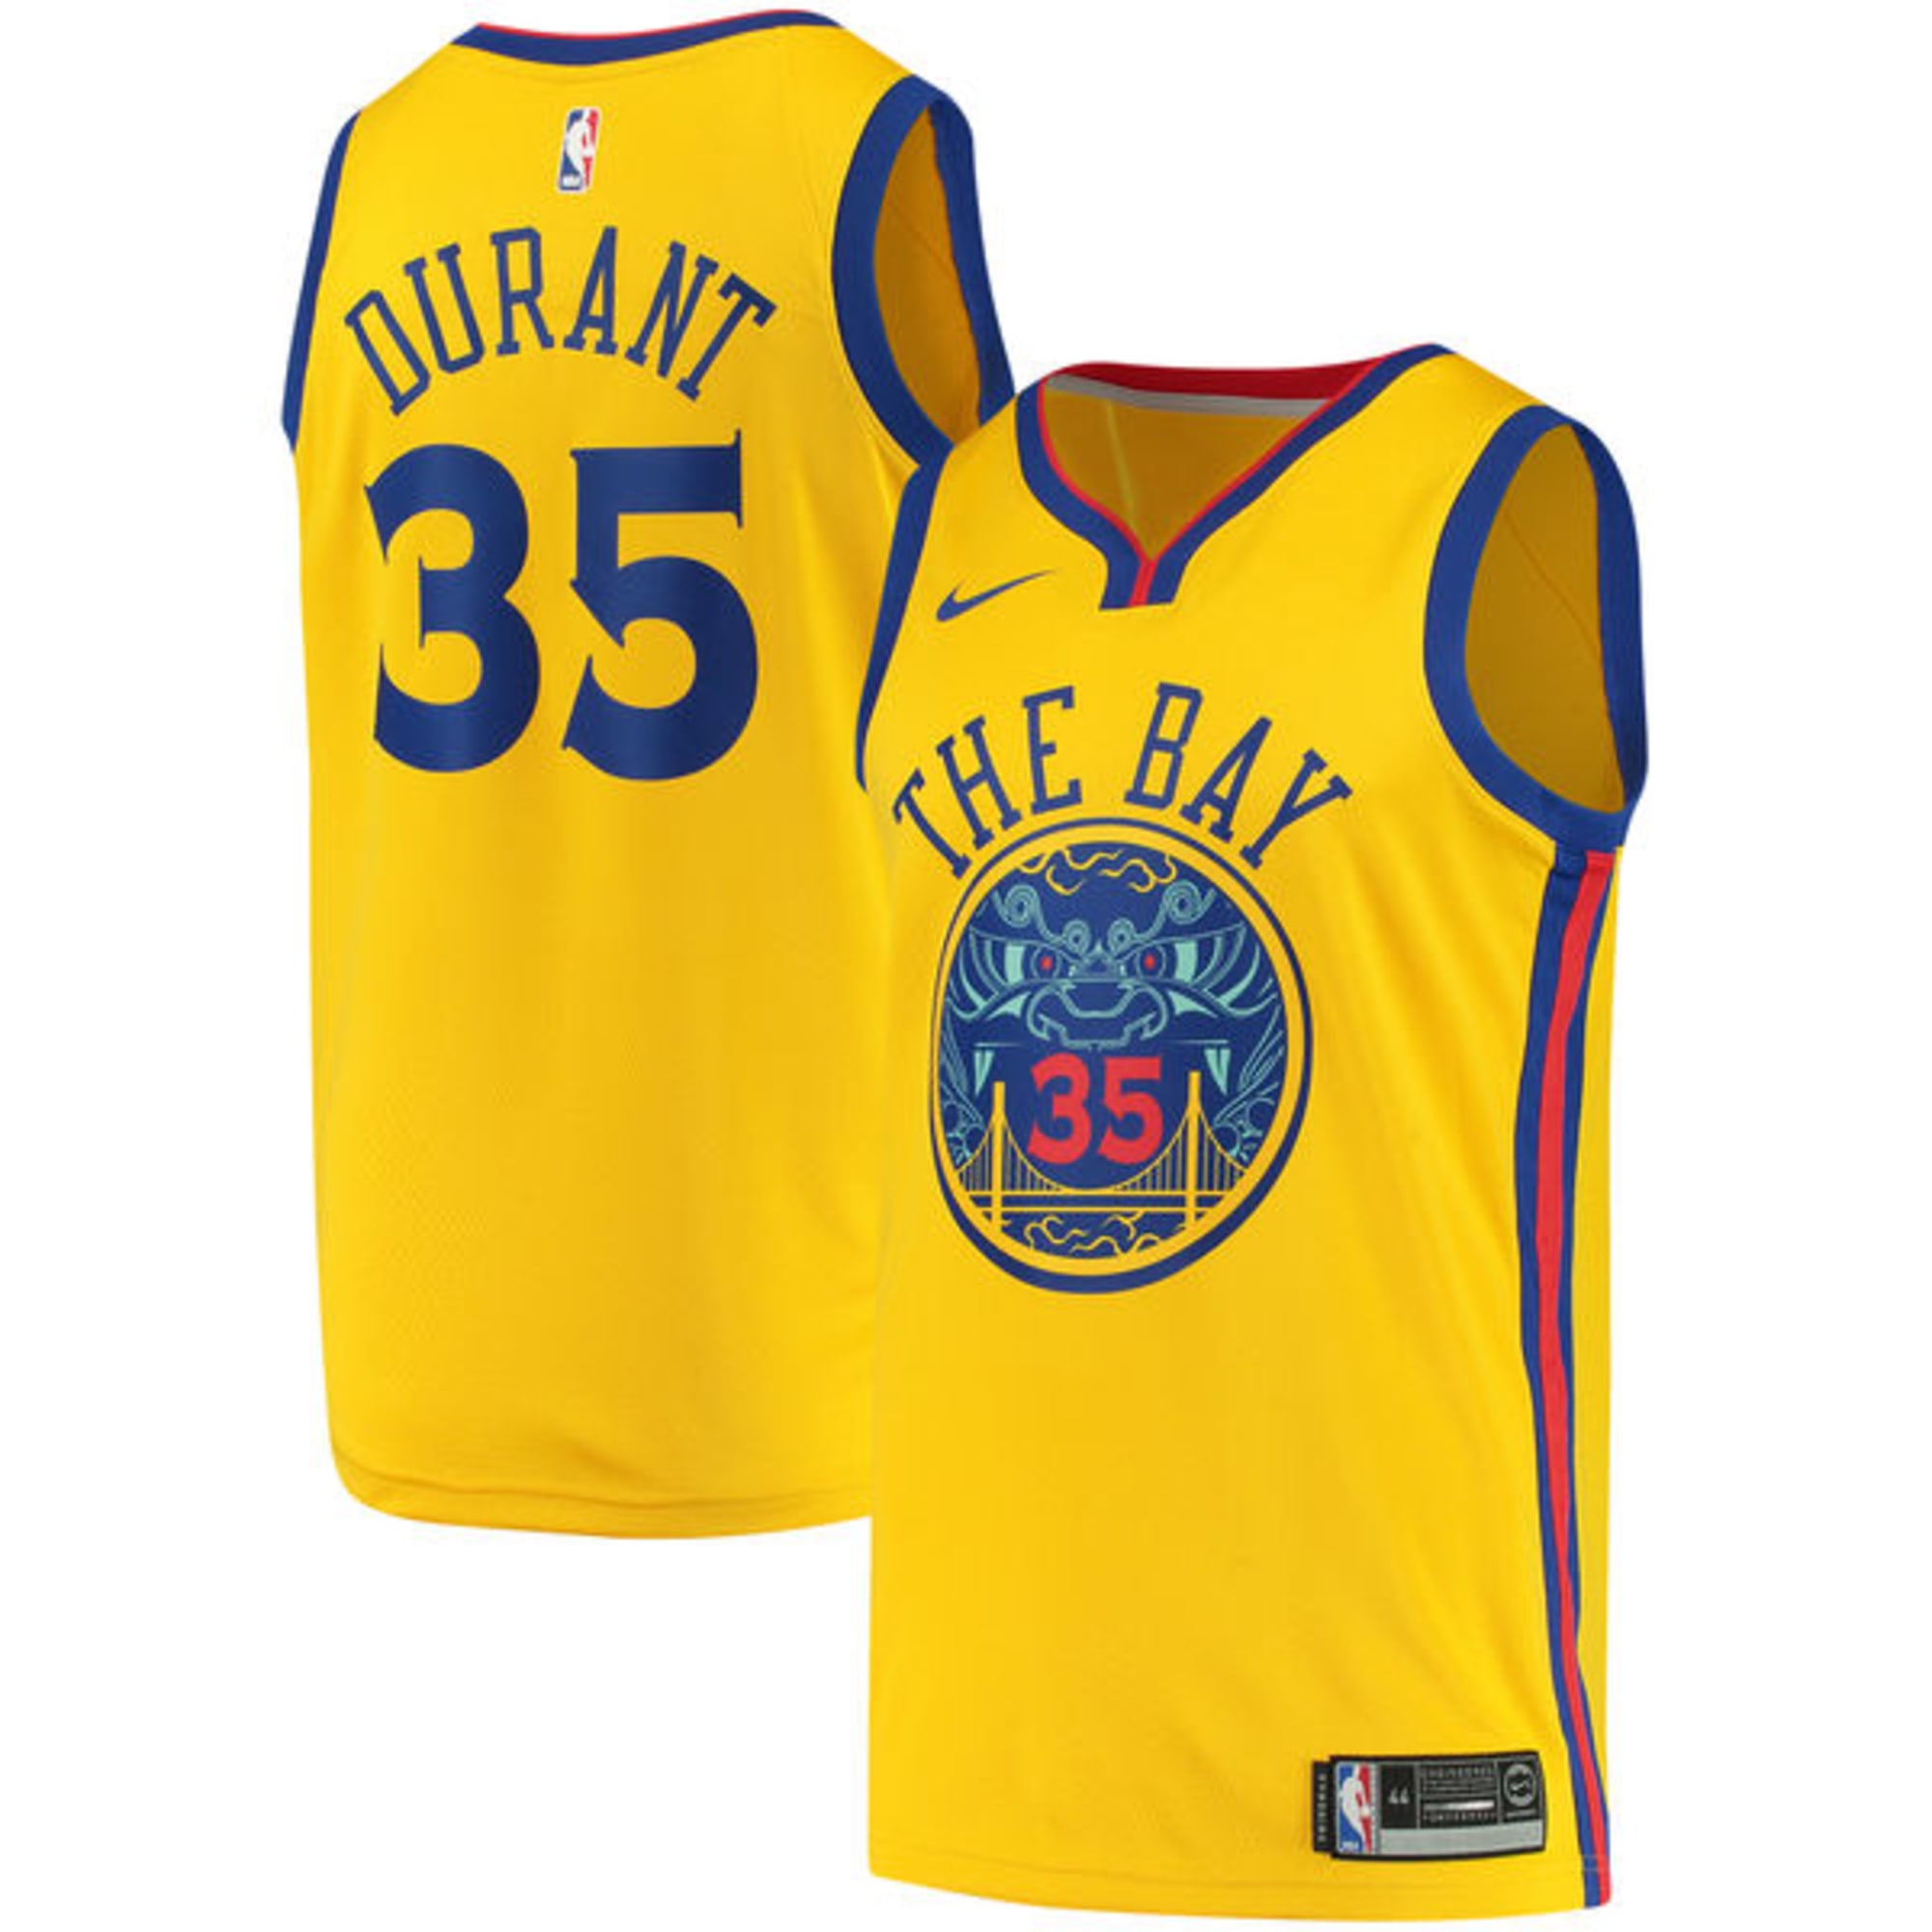 Golden State Warriors Gift Guide: 10 must-have Kevin Durant items